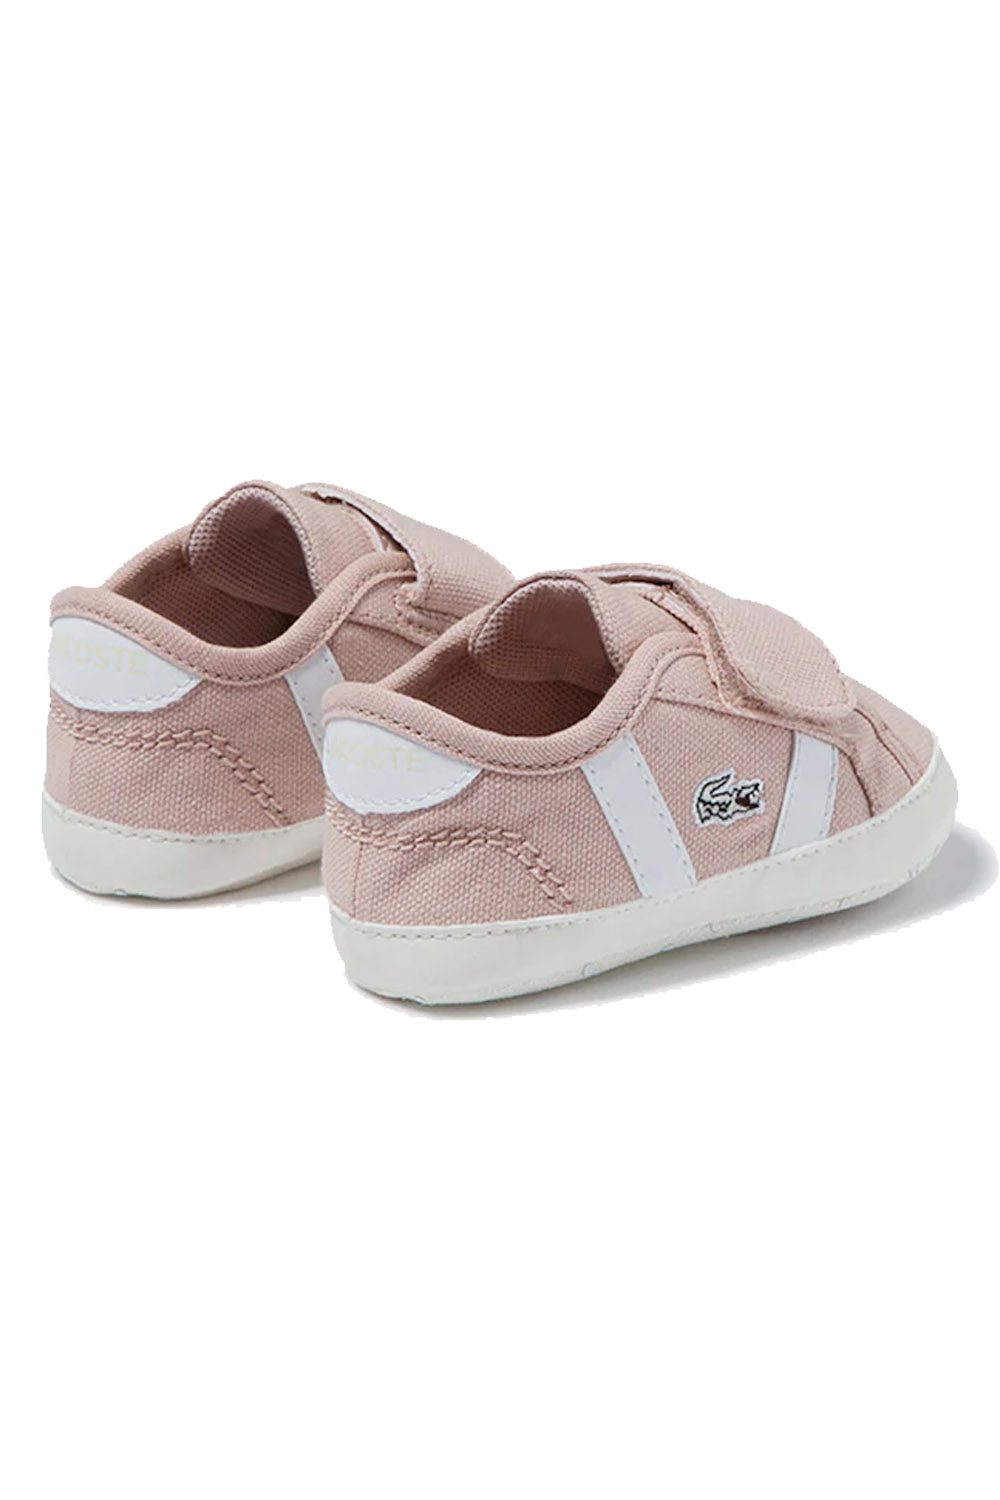 babys first trainers